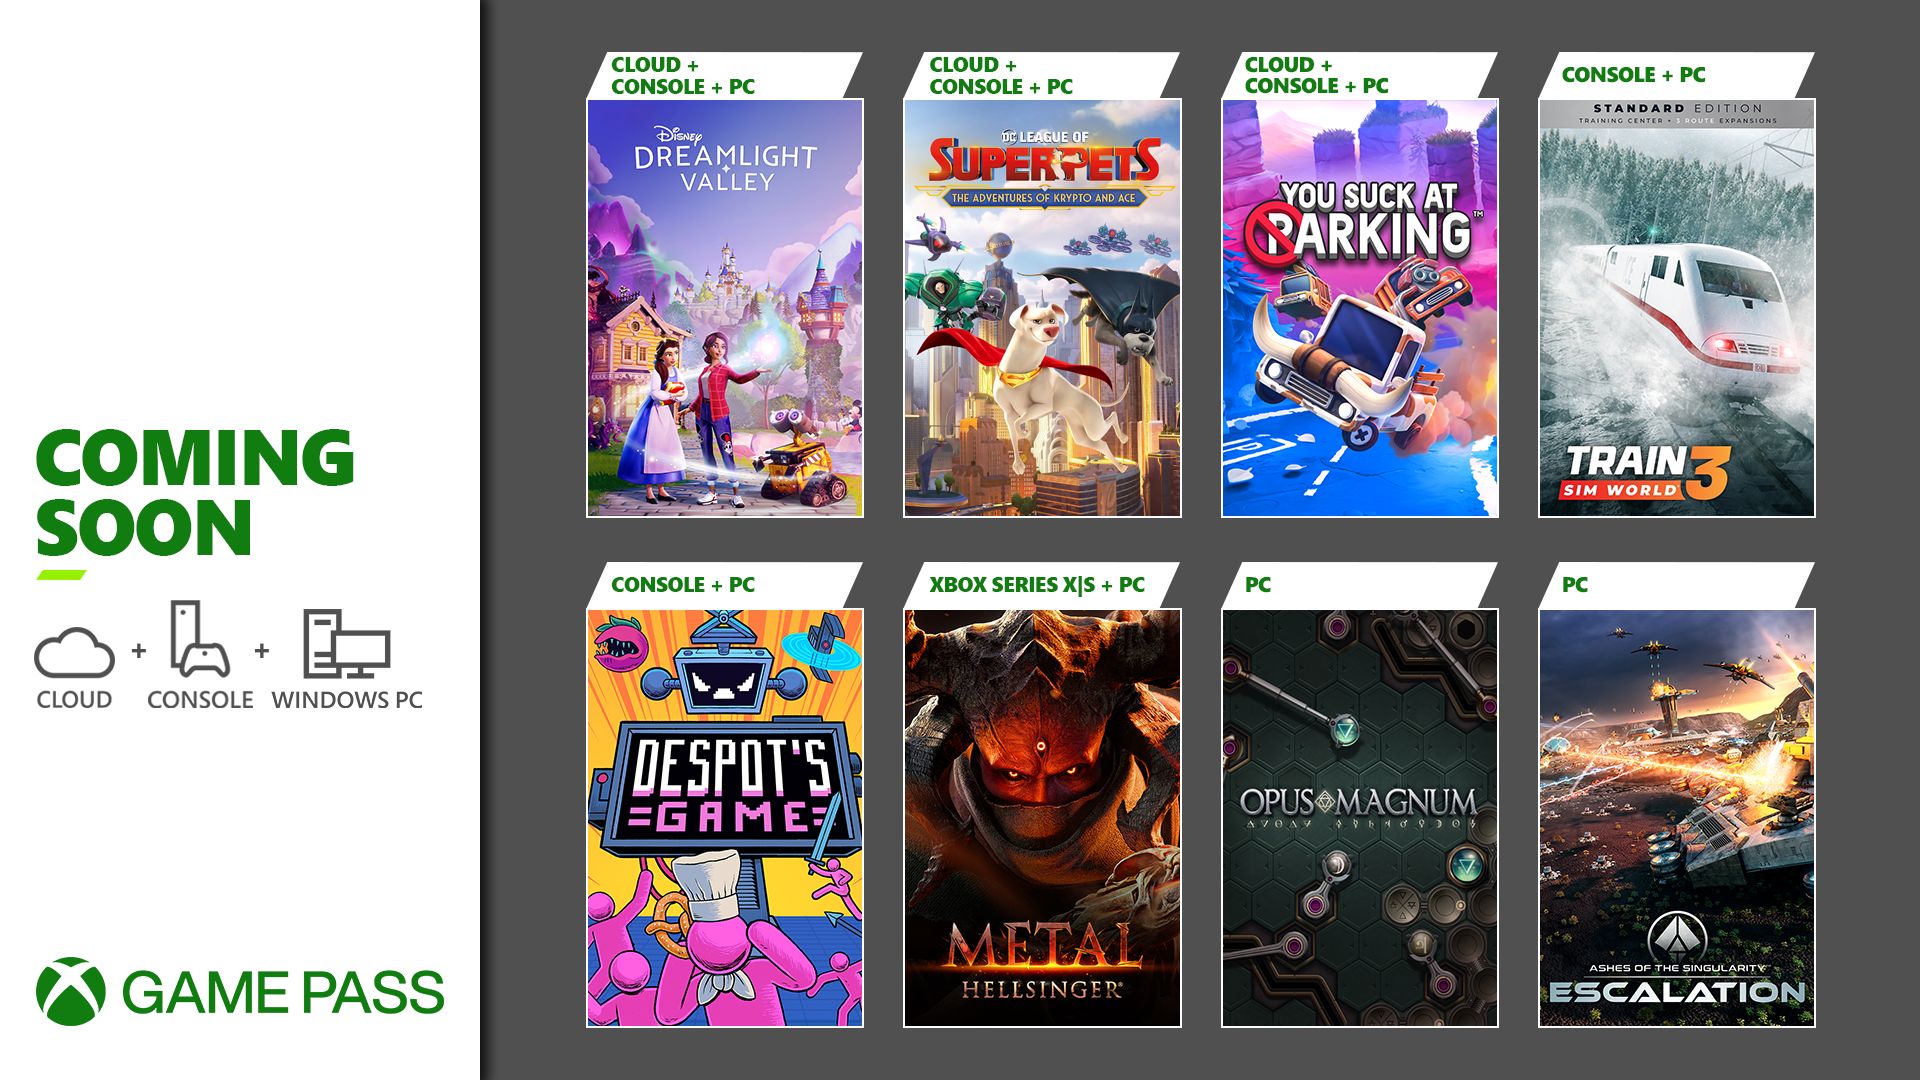 Hit Ubisoft Game and 2 Other Titles Are Free on Xbox Game Pass Ultimate  This Weekend